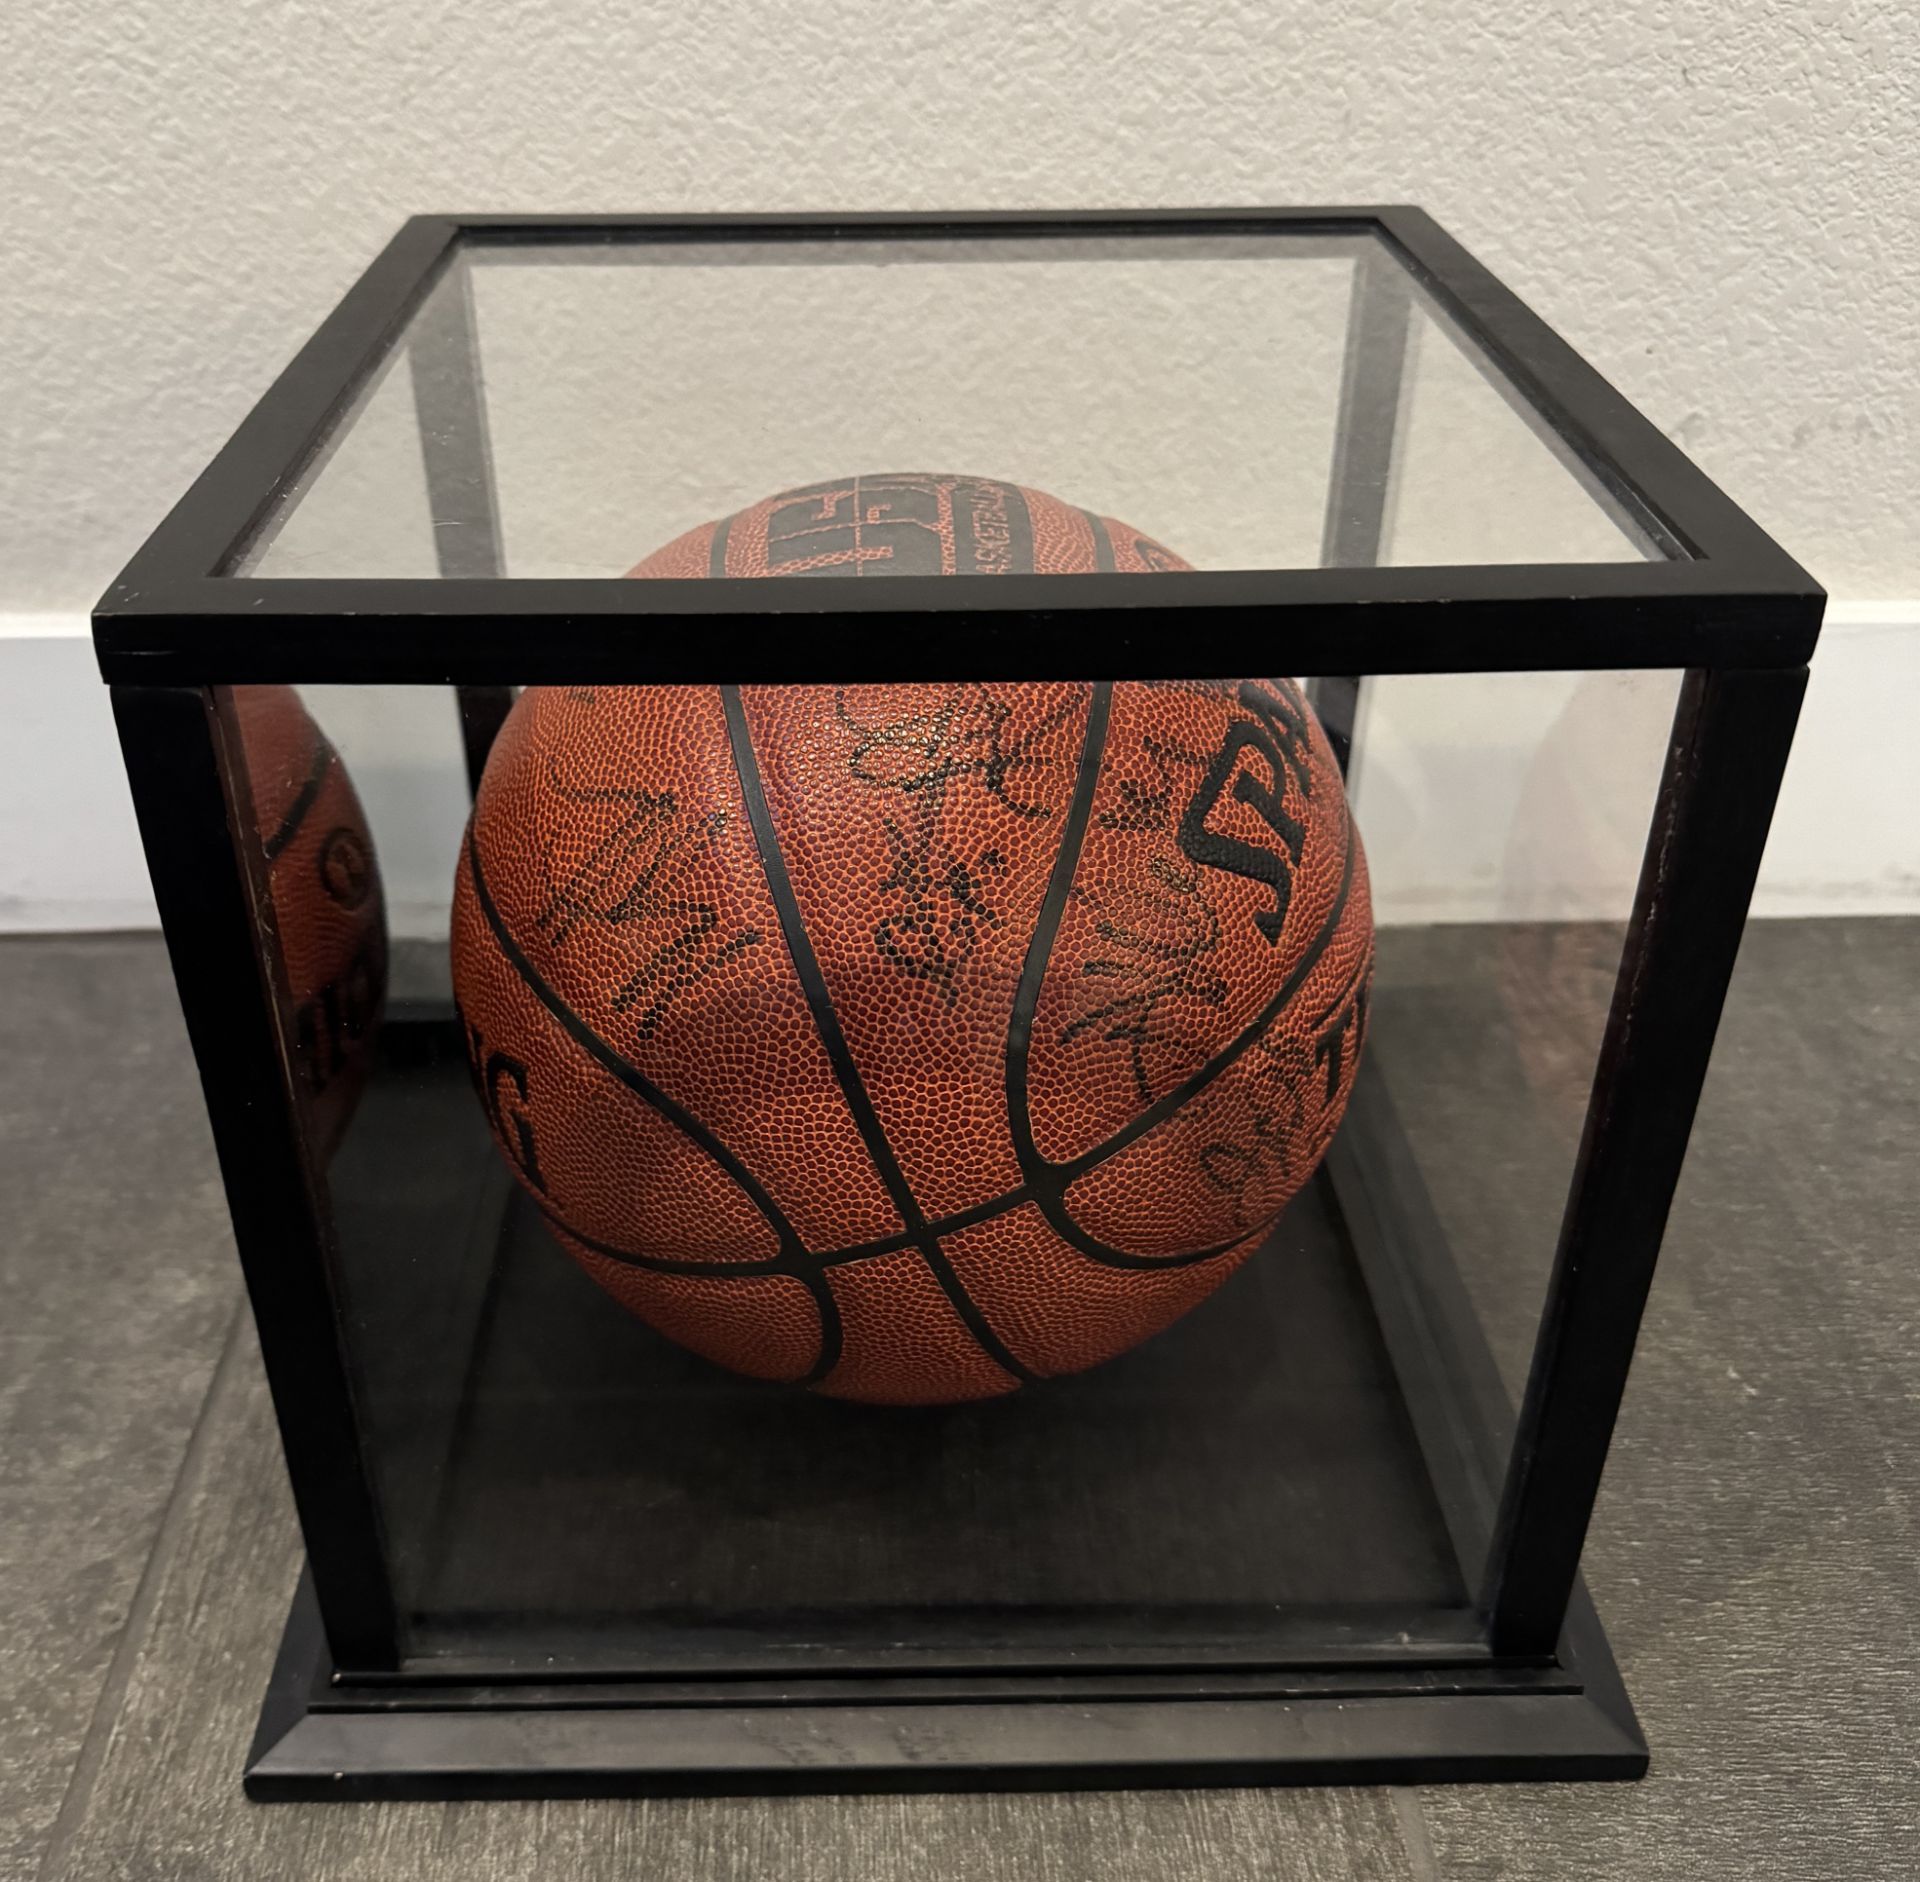 BASKETBALL SIGNED POSSIBLY BY 2012 DREAM TEAM, MISSING MICHAEL JORDAN - Image 4 of 4